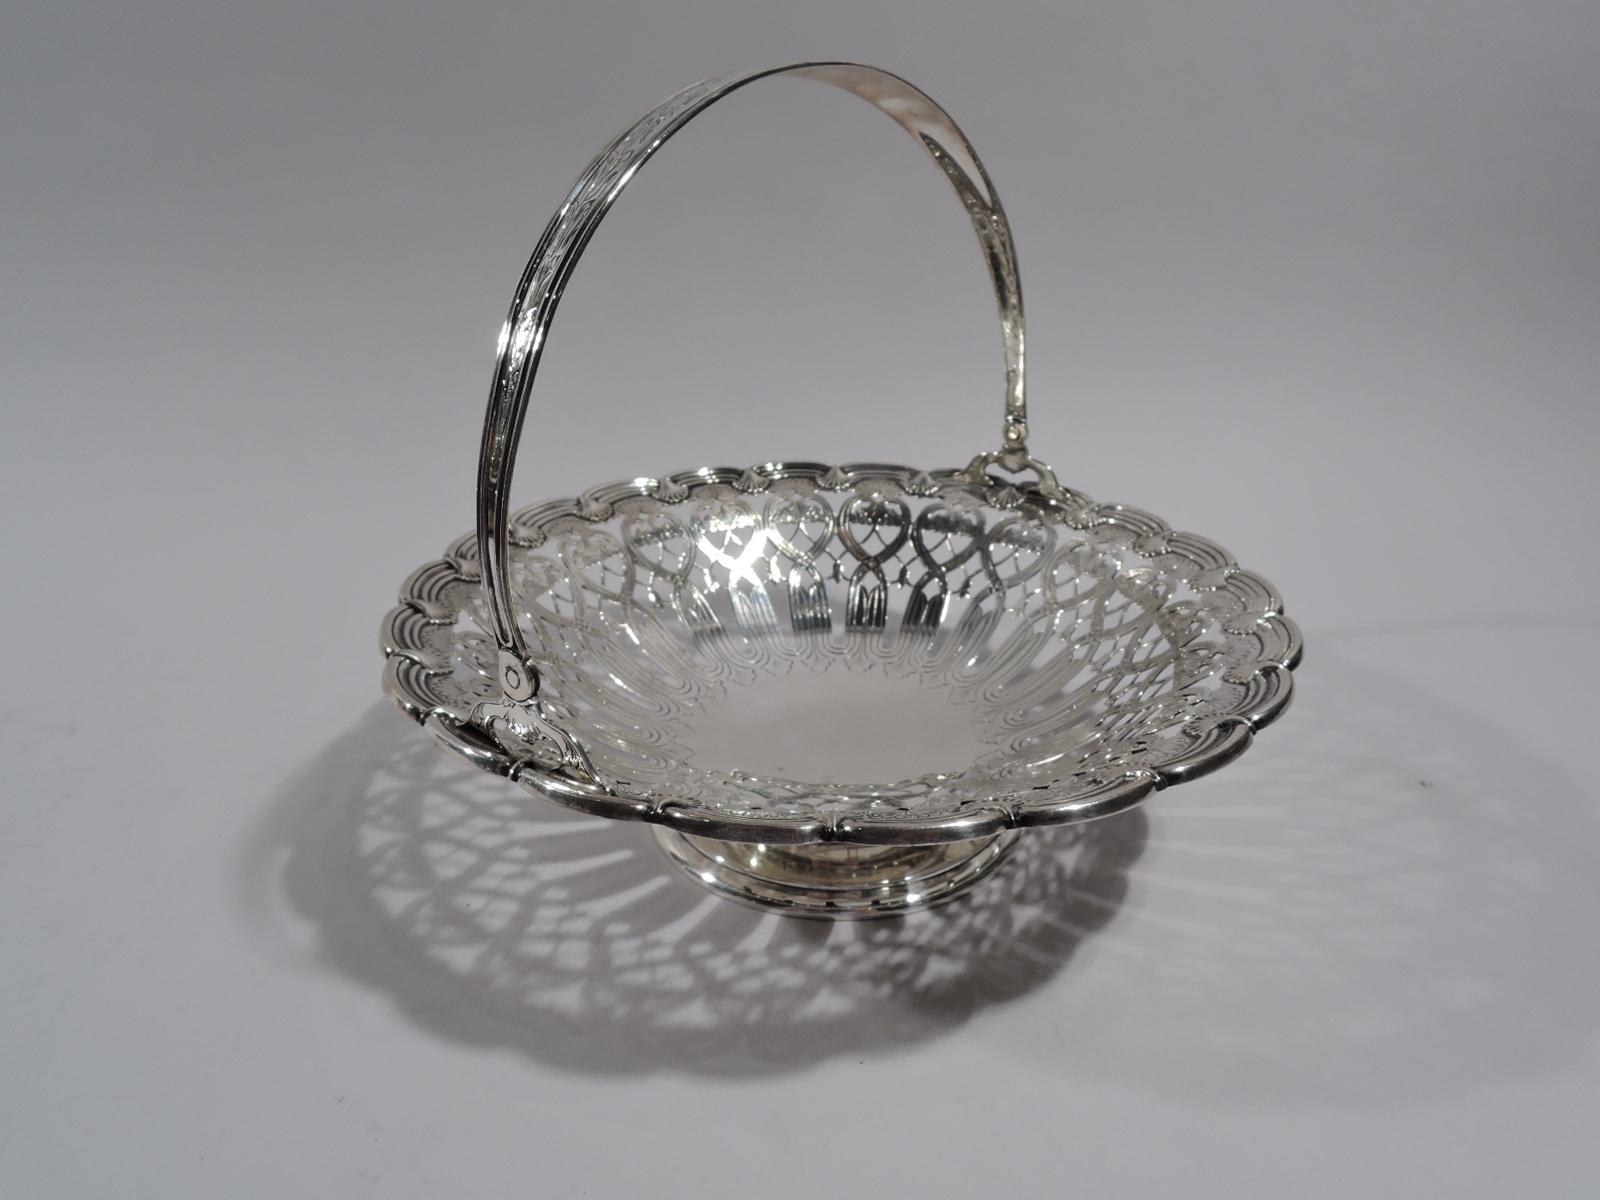 Antique Tiffany American Edwardian Art Nouveau Sterling Silver Basket In Excellent Condition For Sale In New York, NY